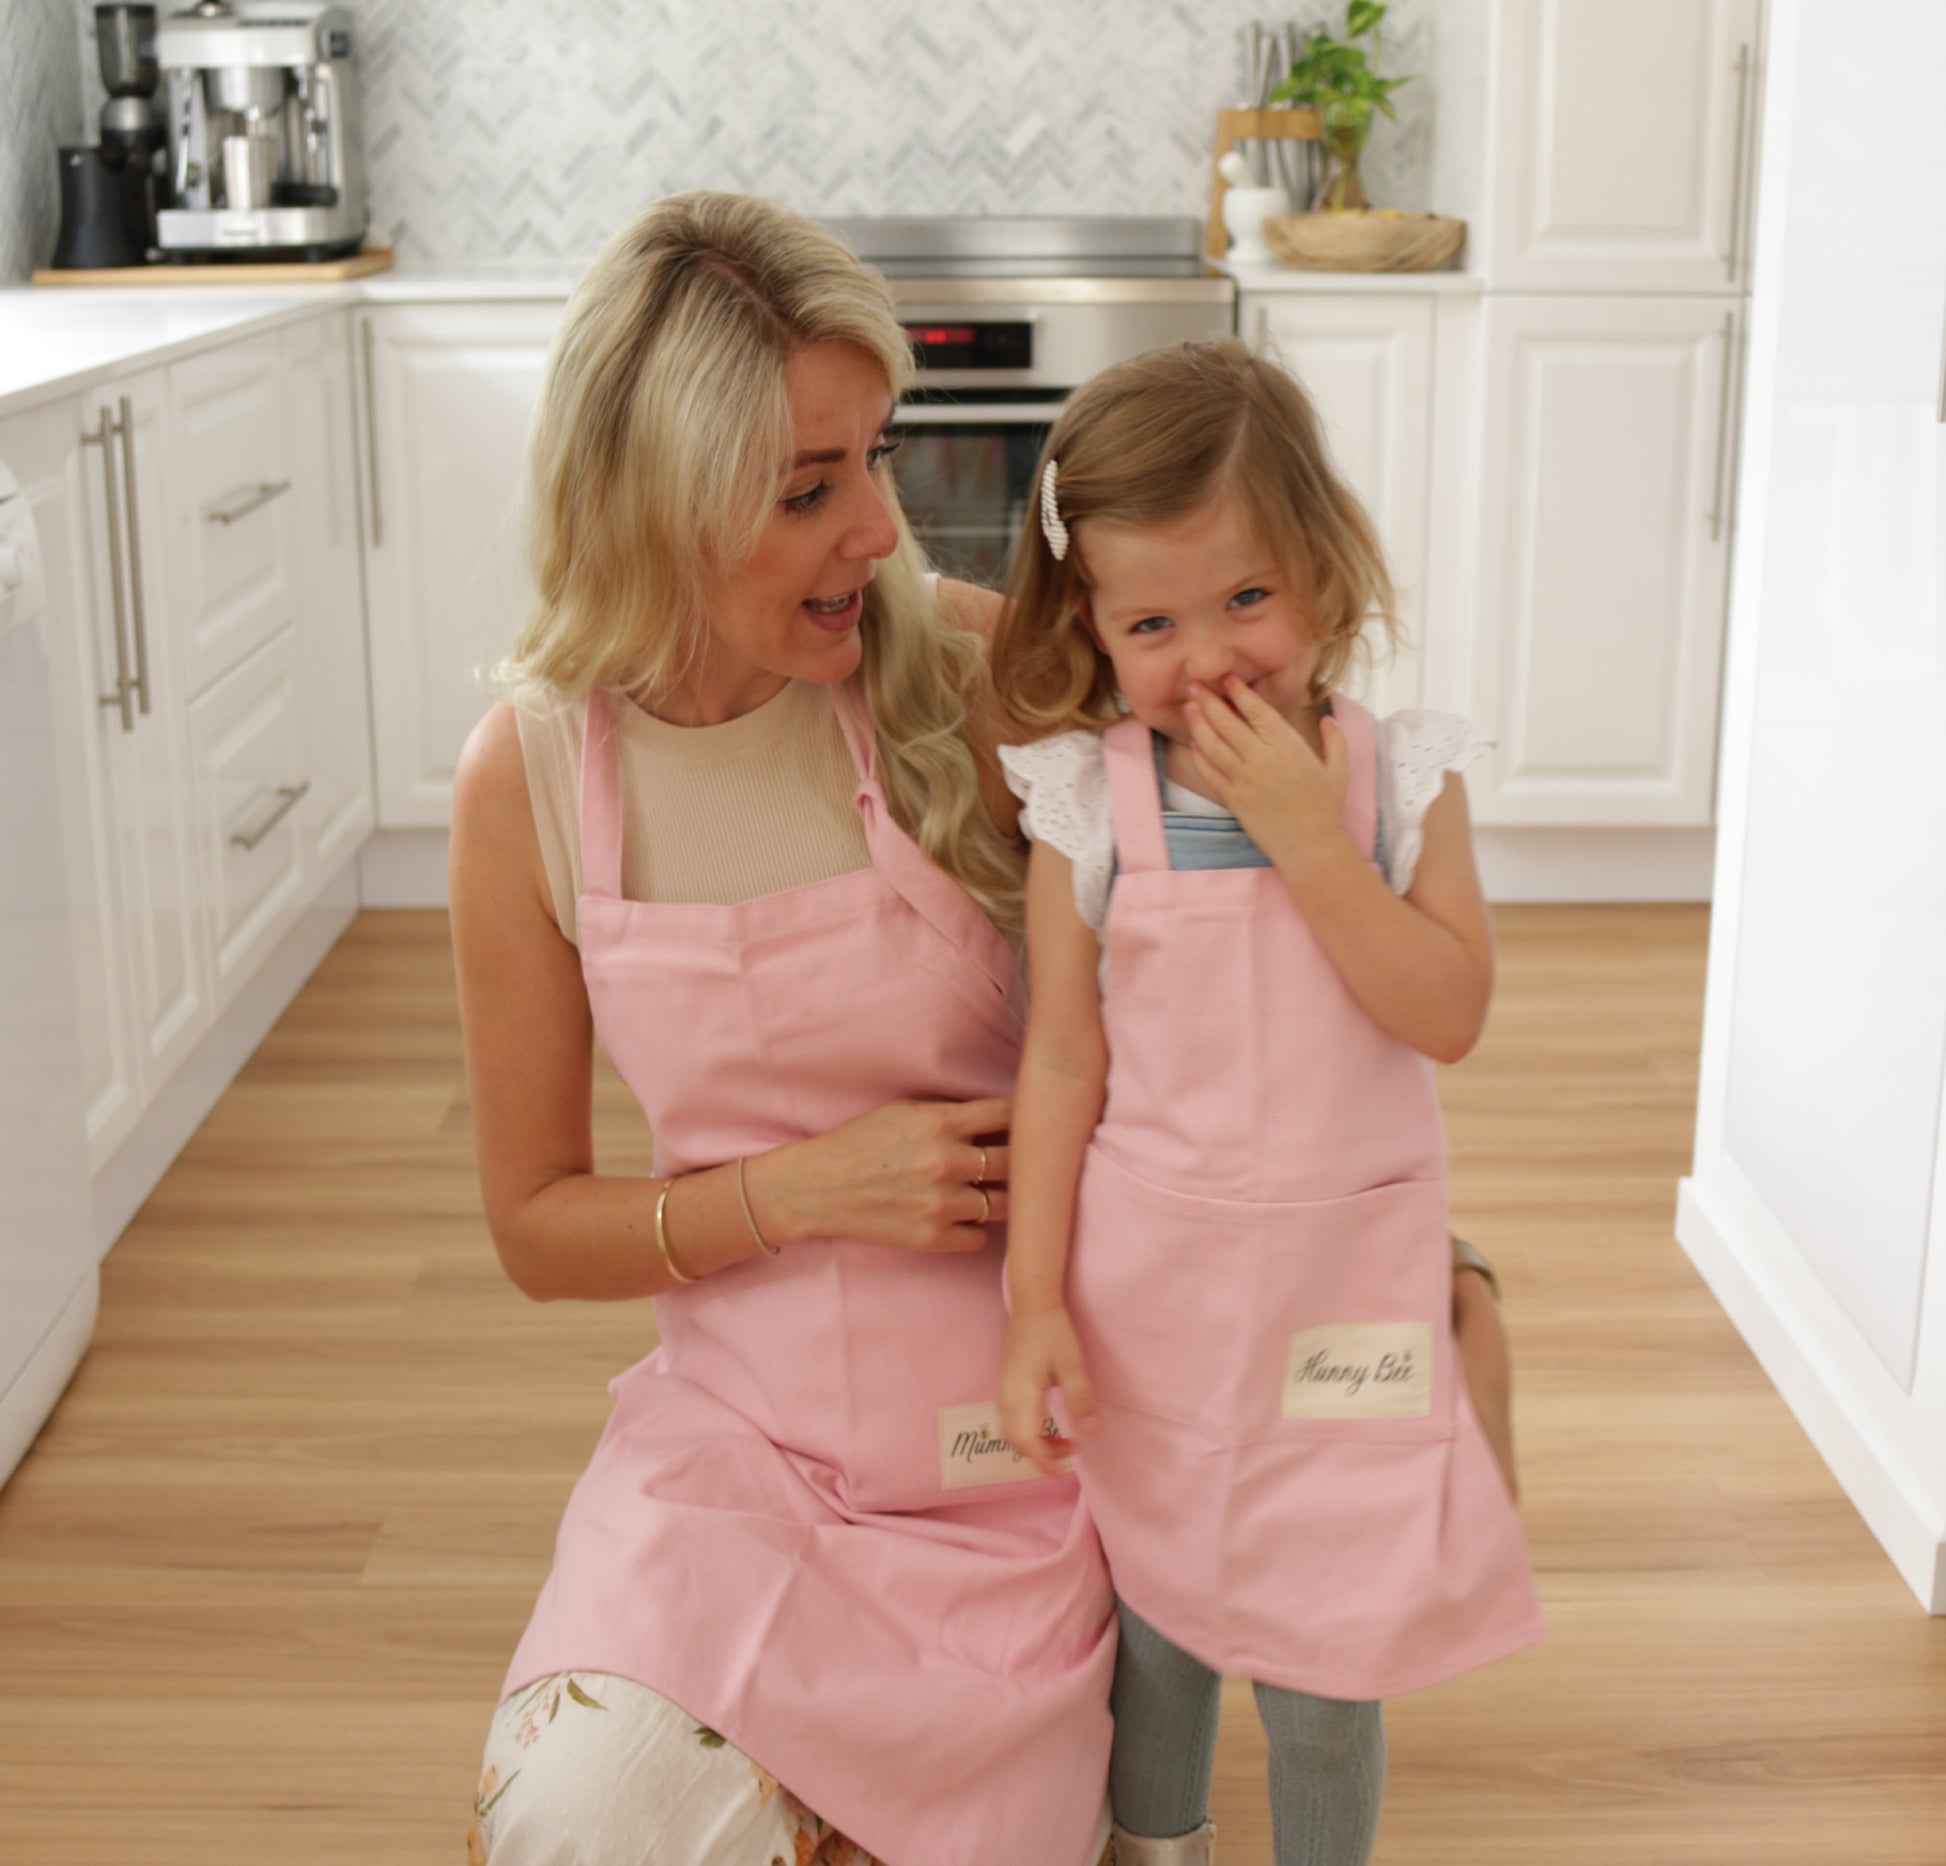 Mommy and Me Set of 2 Aprons Cooking Personalized Gift Custom